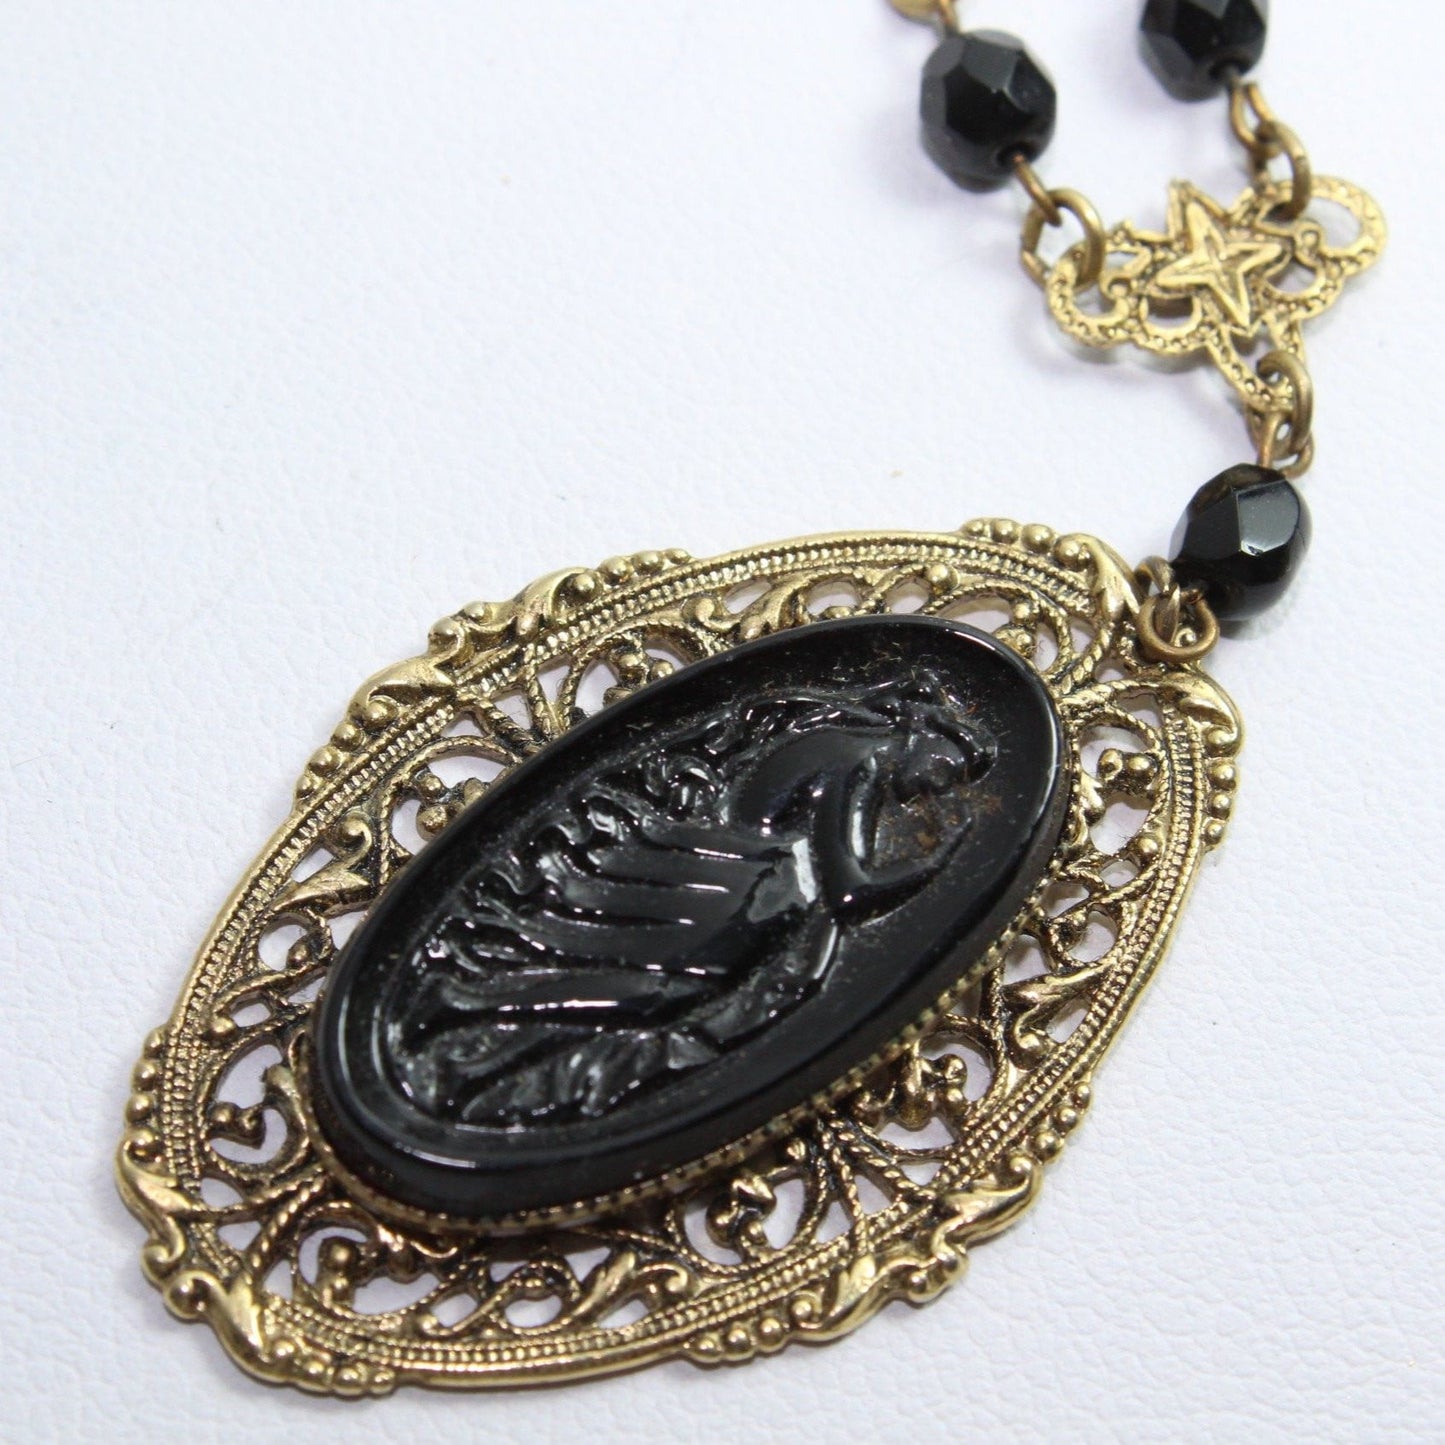 1928 Gold Tone Pendant Necklace - Reproduction Filigree Victorian Woman - 16" - Olde Kitchen & Home